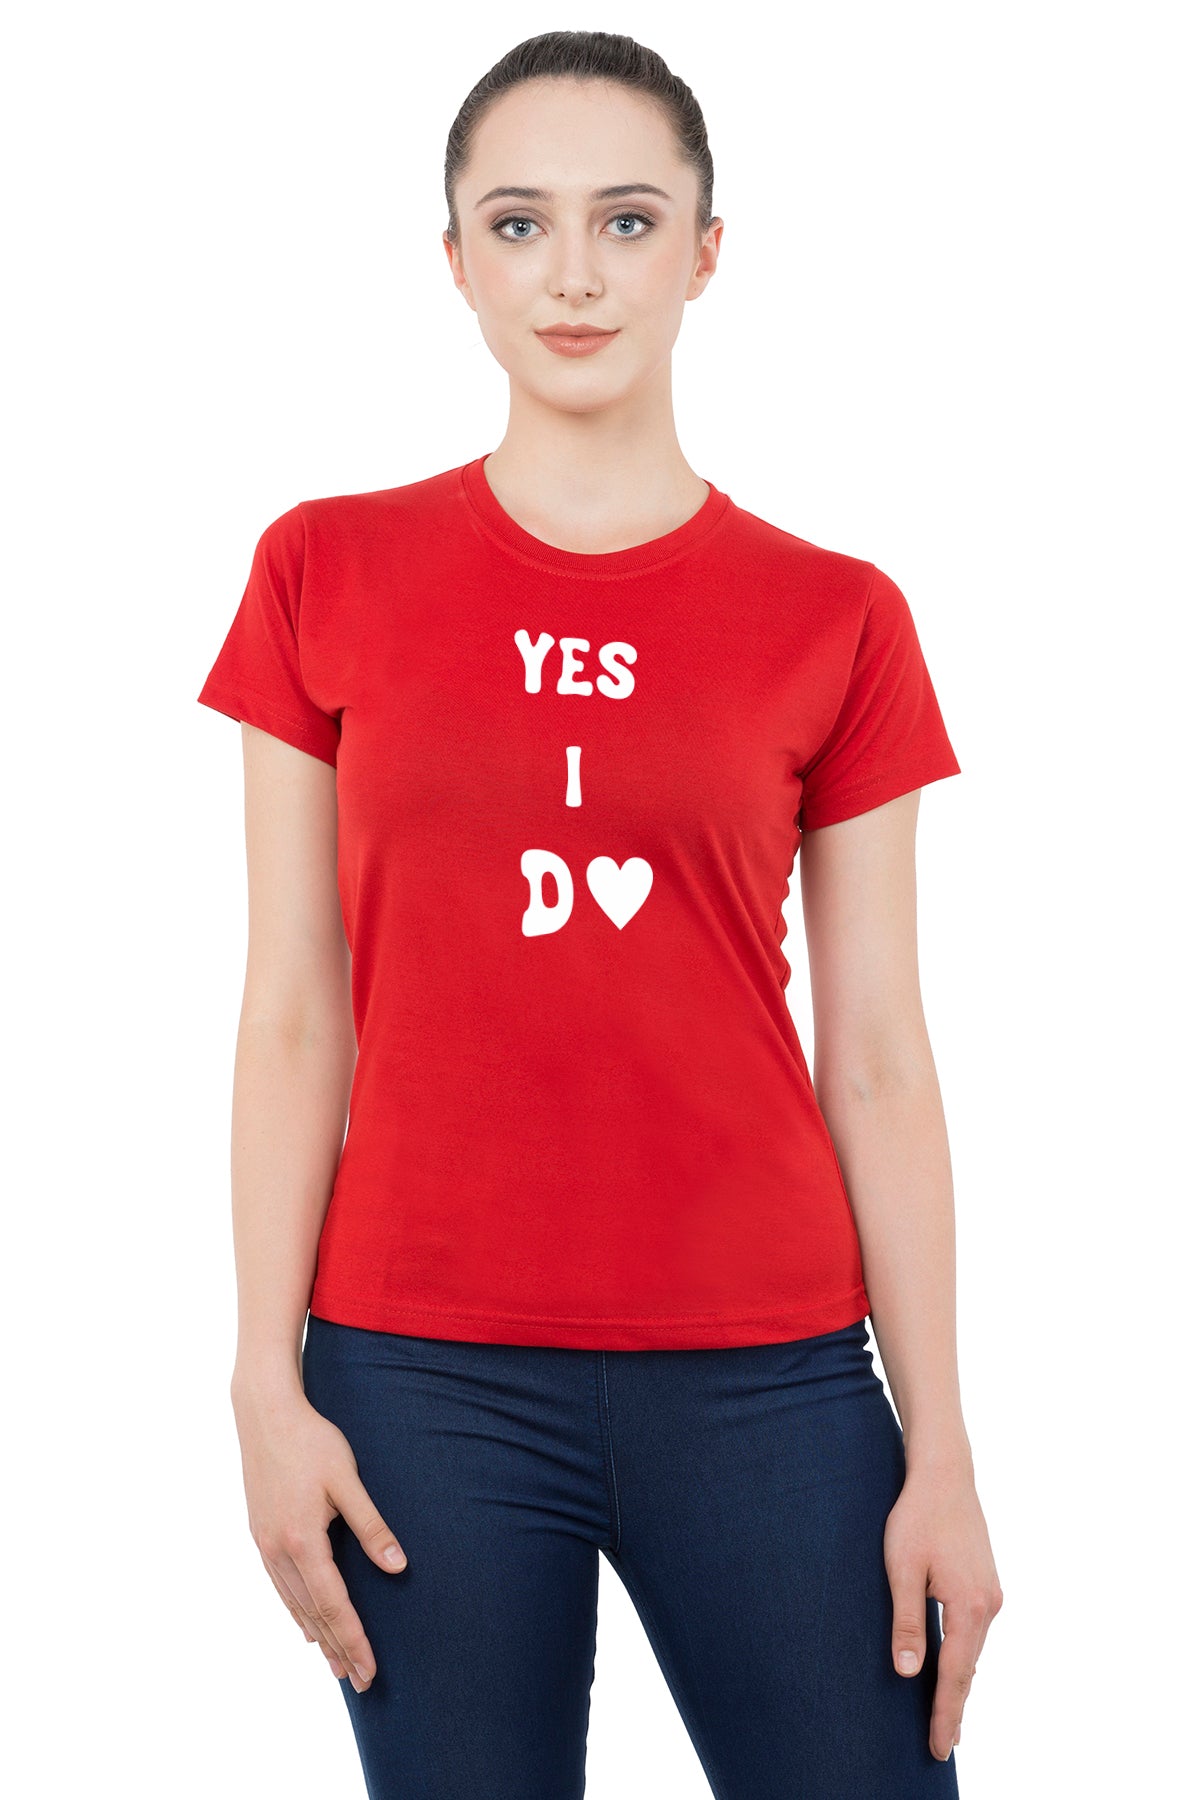 Marry Me matching Couple T shirts- Red